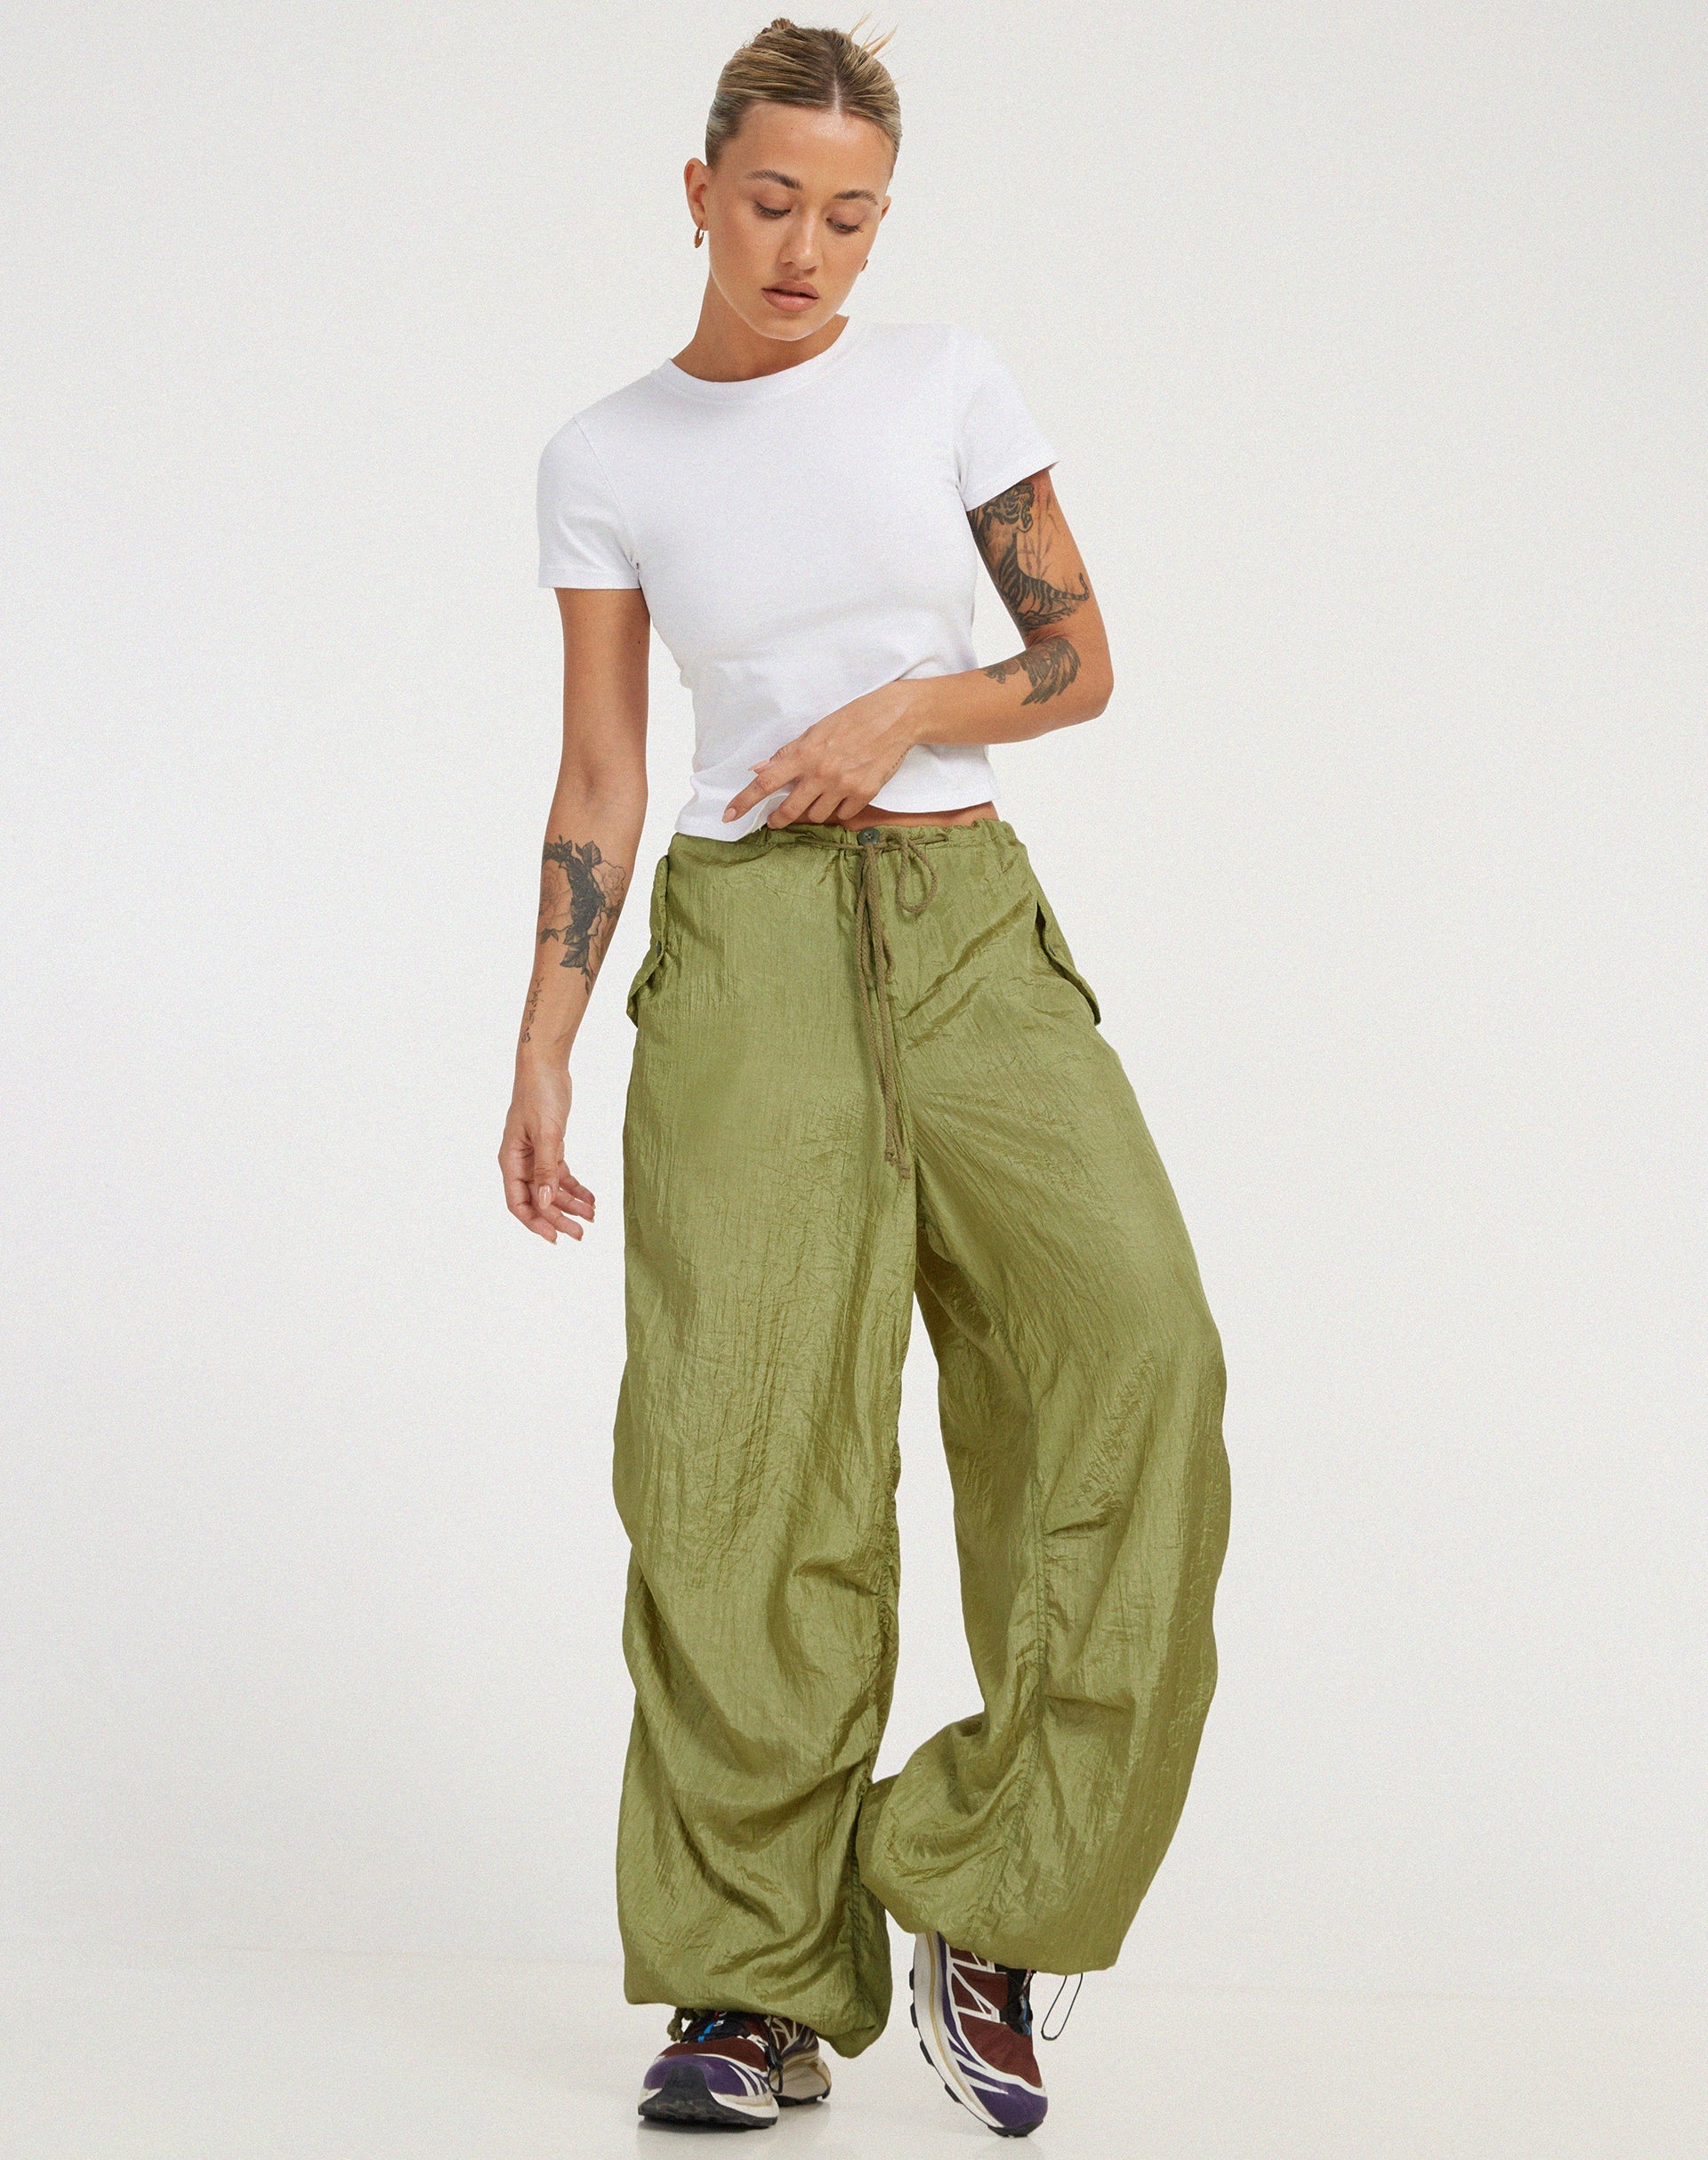 image of Chute Trouser in Parachute Pickle